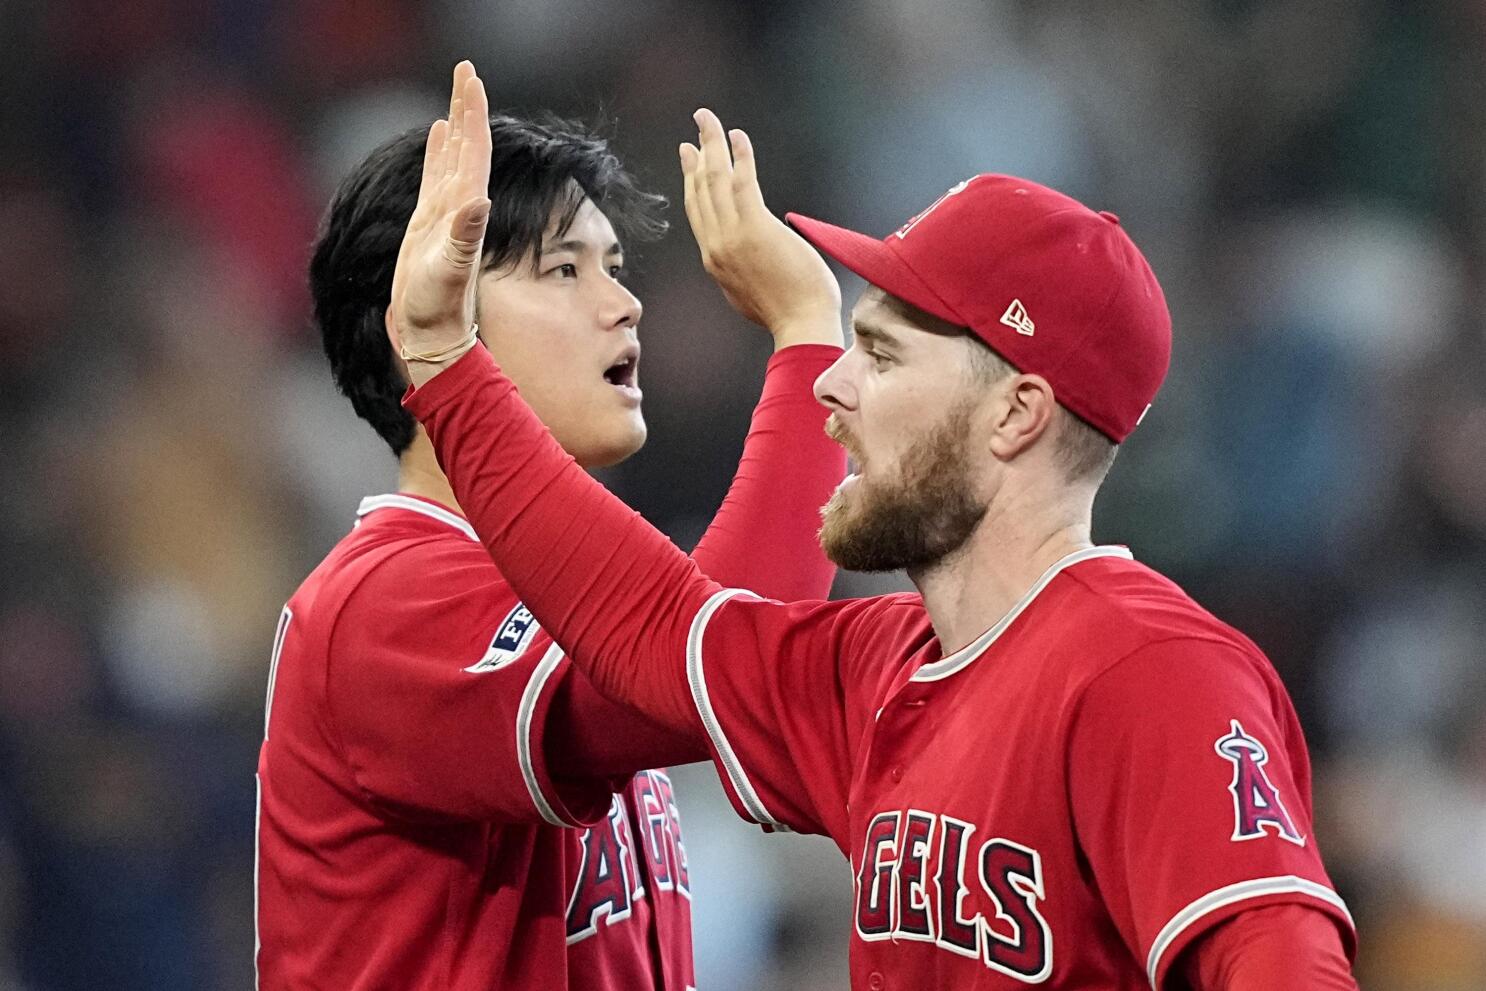 Angels take a 2-1 win over the Astros